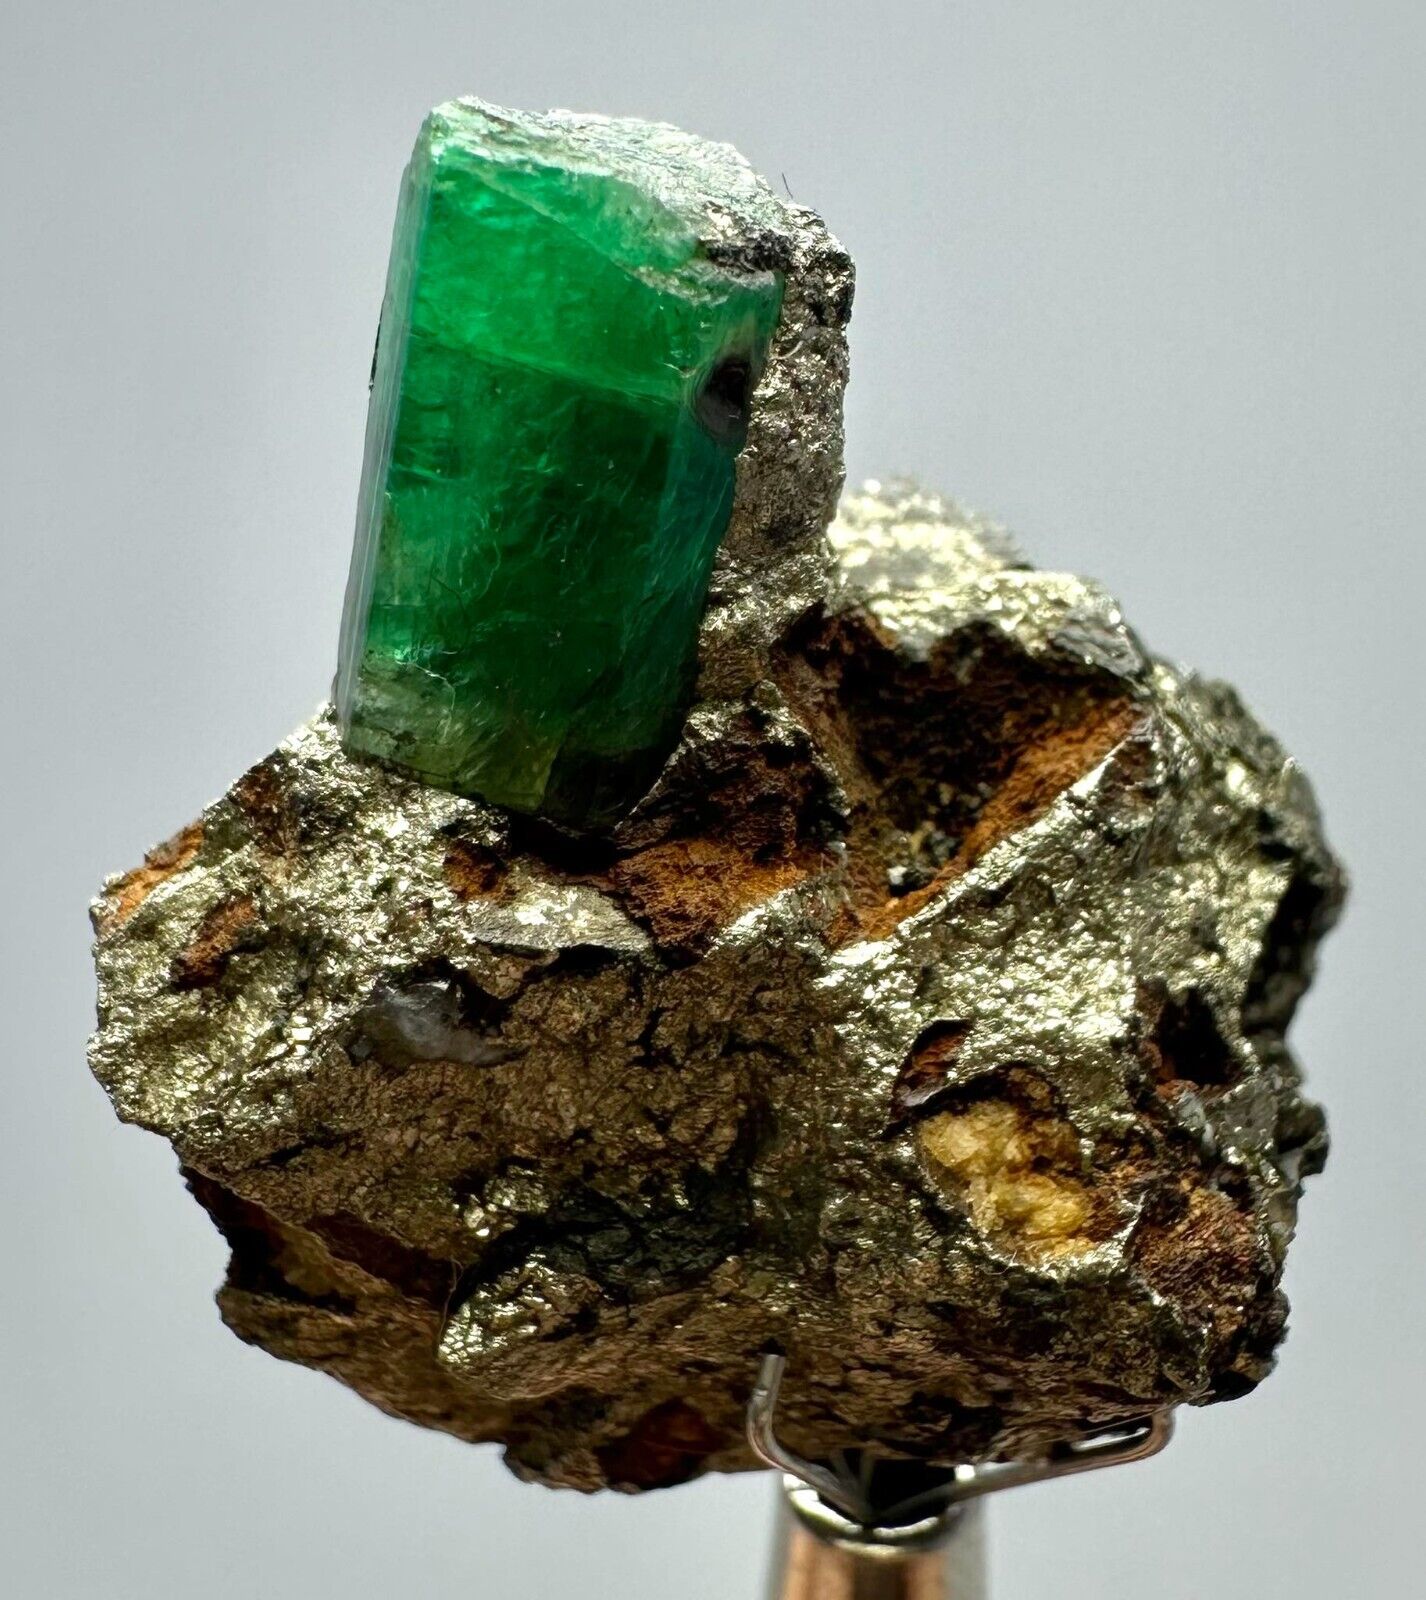 60 Ct Well Terminated Top Green Panjsher Emerald Crystal On Pyrites From @AFGHAN